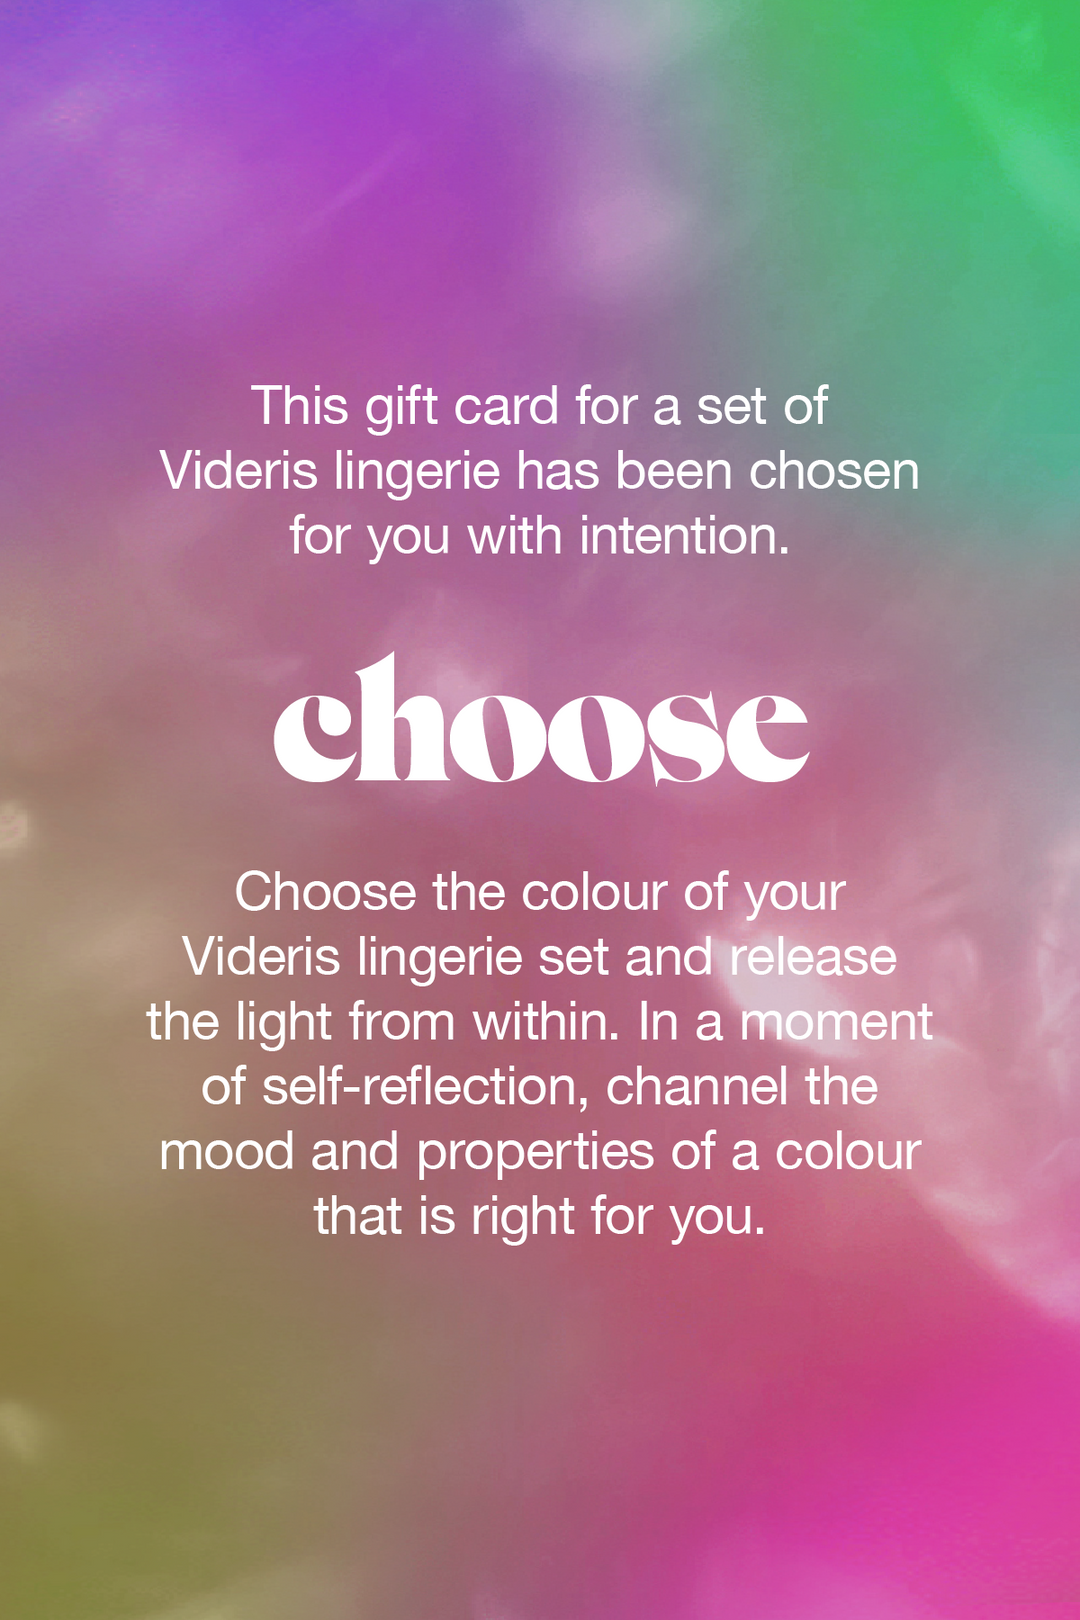 Choose the colour of your Videris Lingerie set and release the light from within. In a moment of self-reflection, channel the mood and properties of a colour that is right for you.